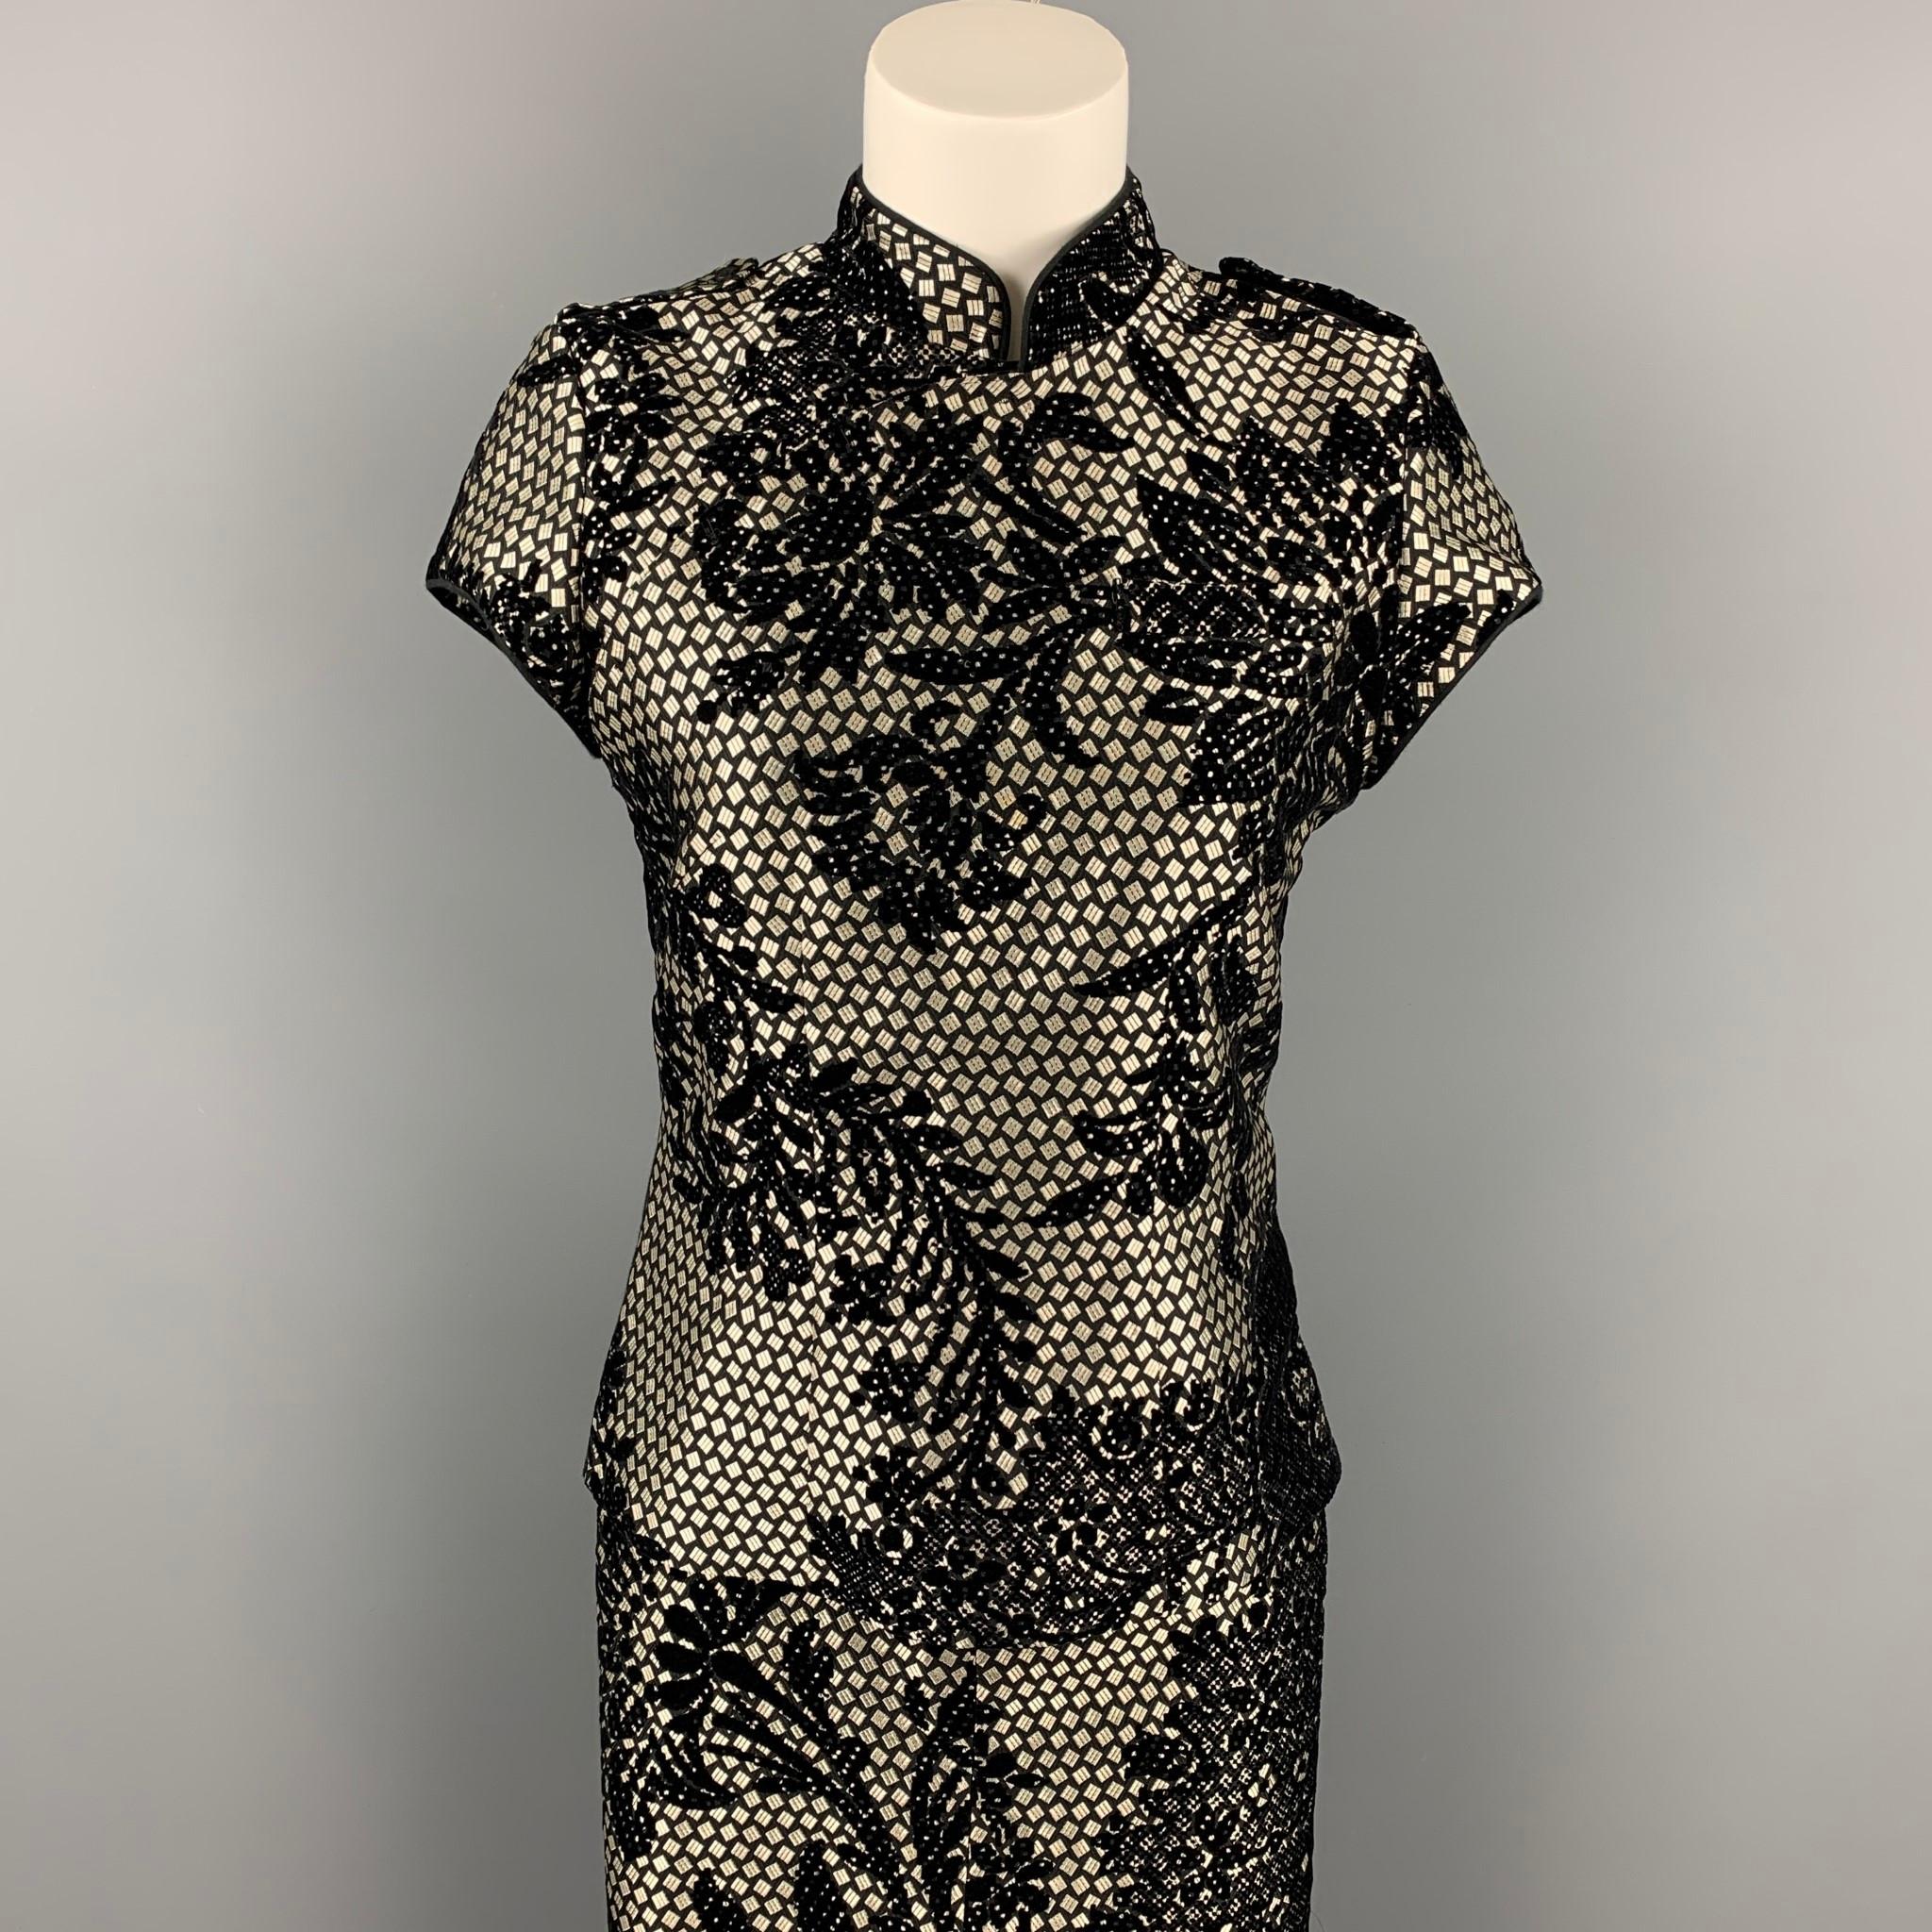 A.F. VANDERVORST skirt set comes in a black & silver jacquard acetate with velvet cut-outs featuring a nehru collar, front buttoned detail, back zip up closure and a matching pencil skirt. Made in Belgium.

Very Good Pre-Owned Condition.
Marked: